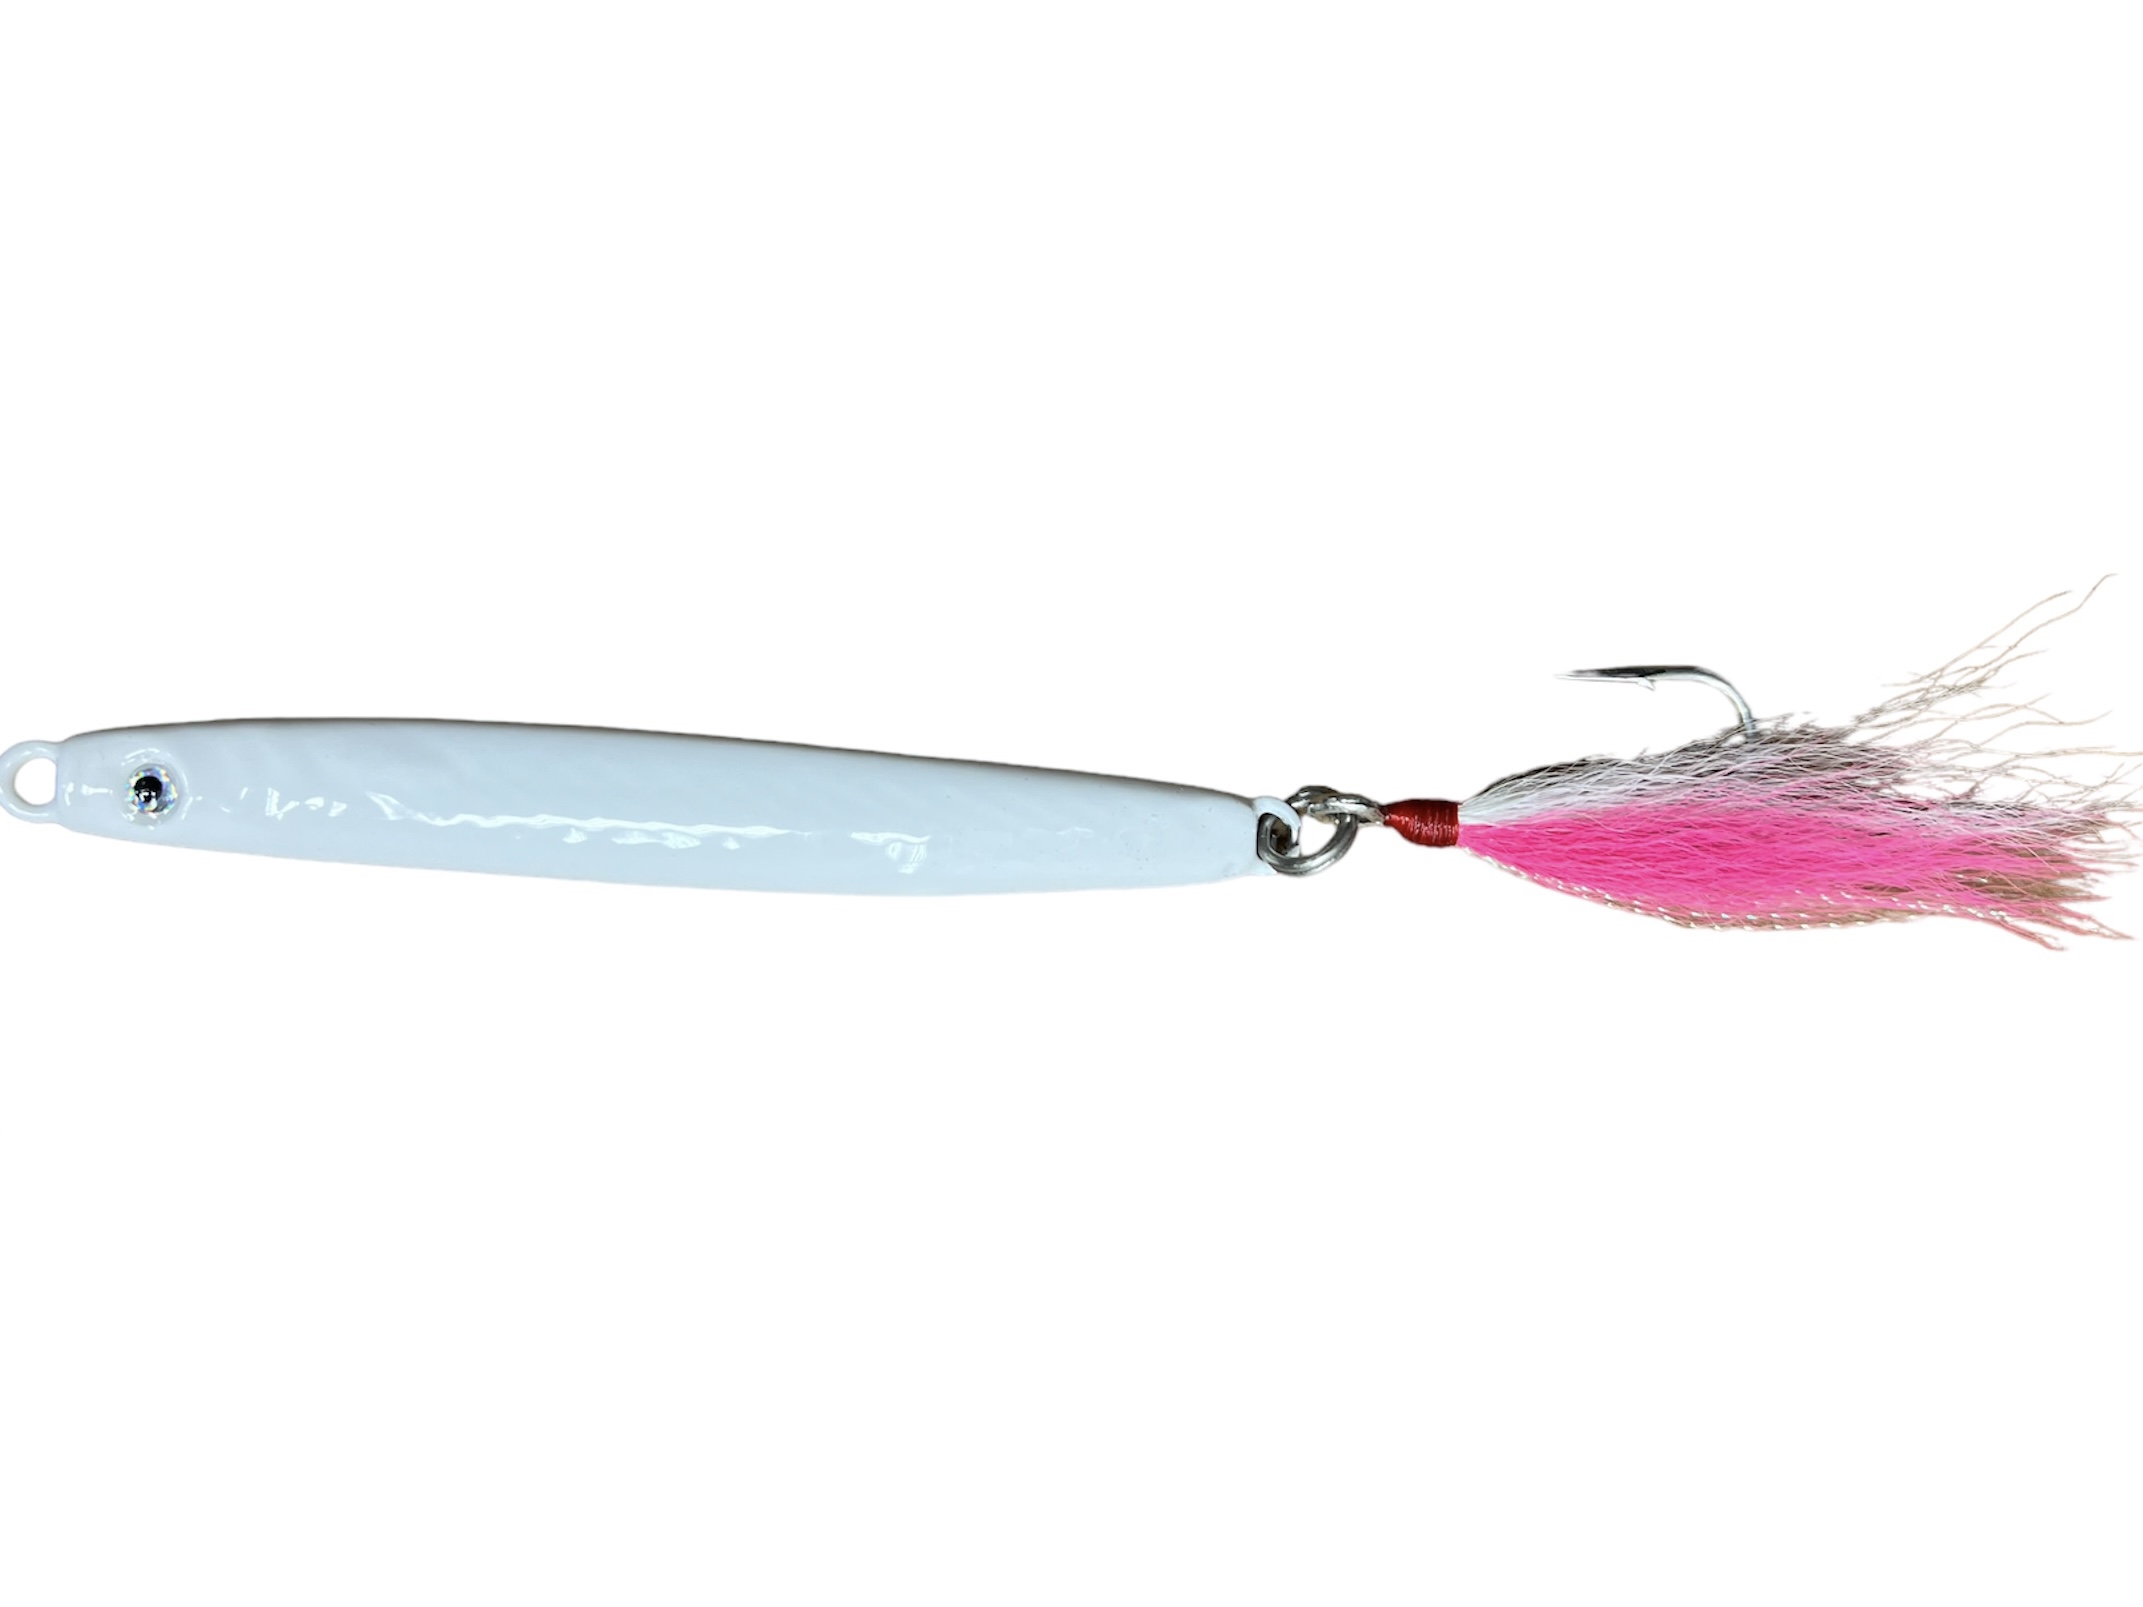 https://cdn11.bigcommerce.com/s-s7ib93jl4n/images/stencil/original/products/47845/86269/run-off-lures-sand-eel-lure-white-3__77617.1680709378.jpg?c=2